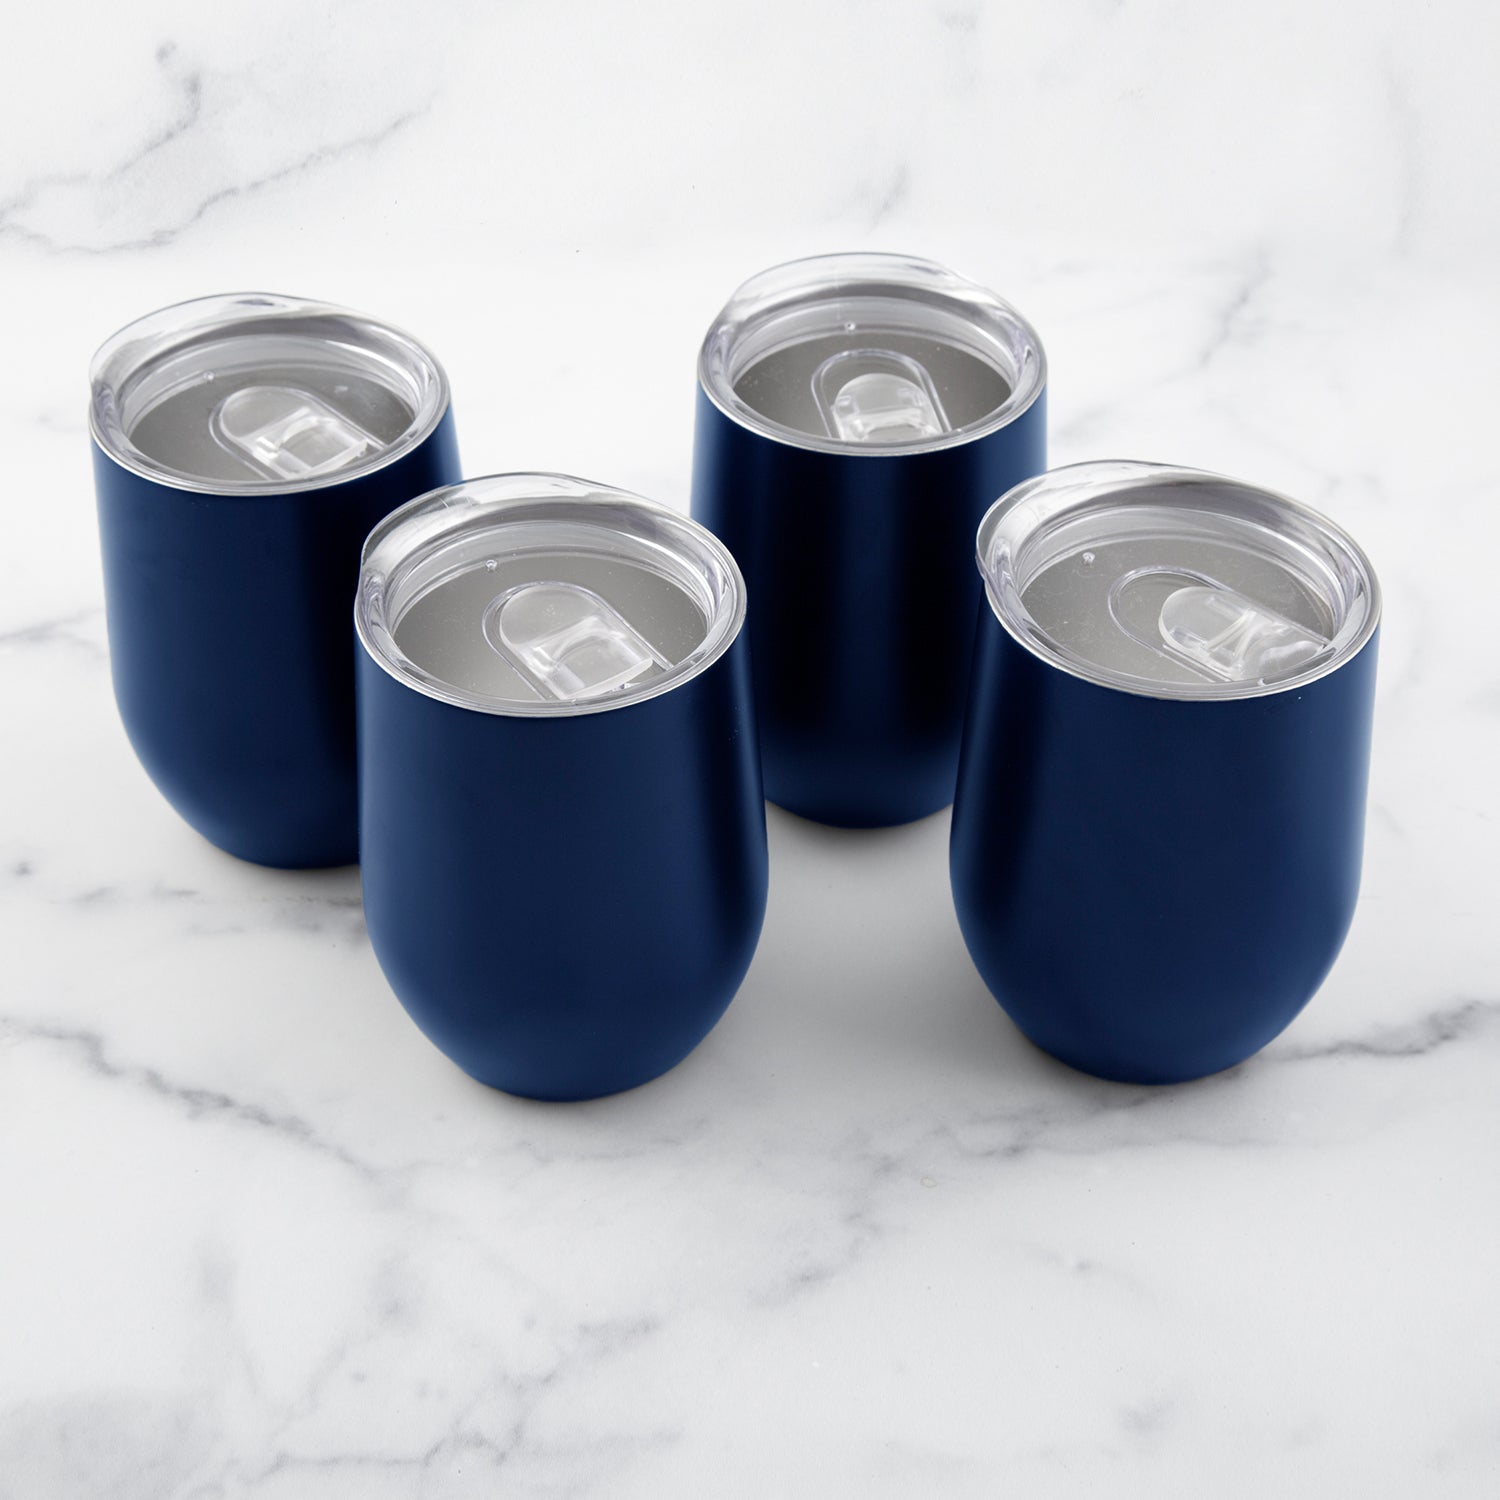 Triple Insulated Wine Tumbler With Lid (4 Pack) 12oz Stainless Steel Wine  Glass Set- Insulated Tumbl…See more Triple Insulated Wine Tumbler With Lid